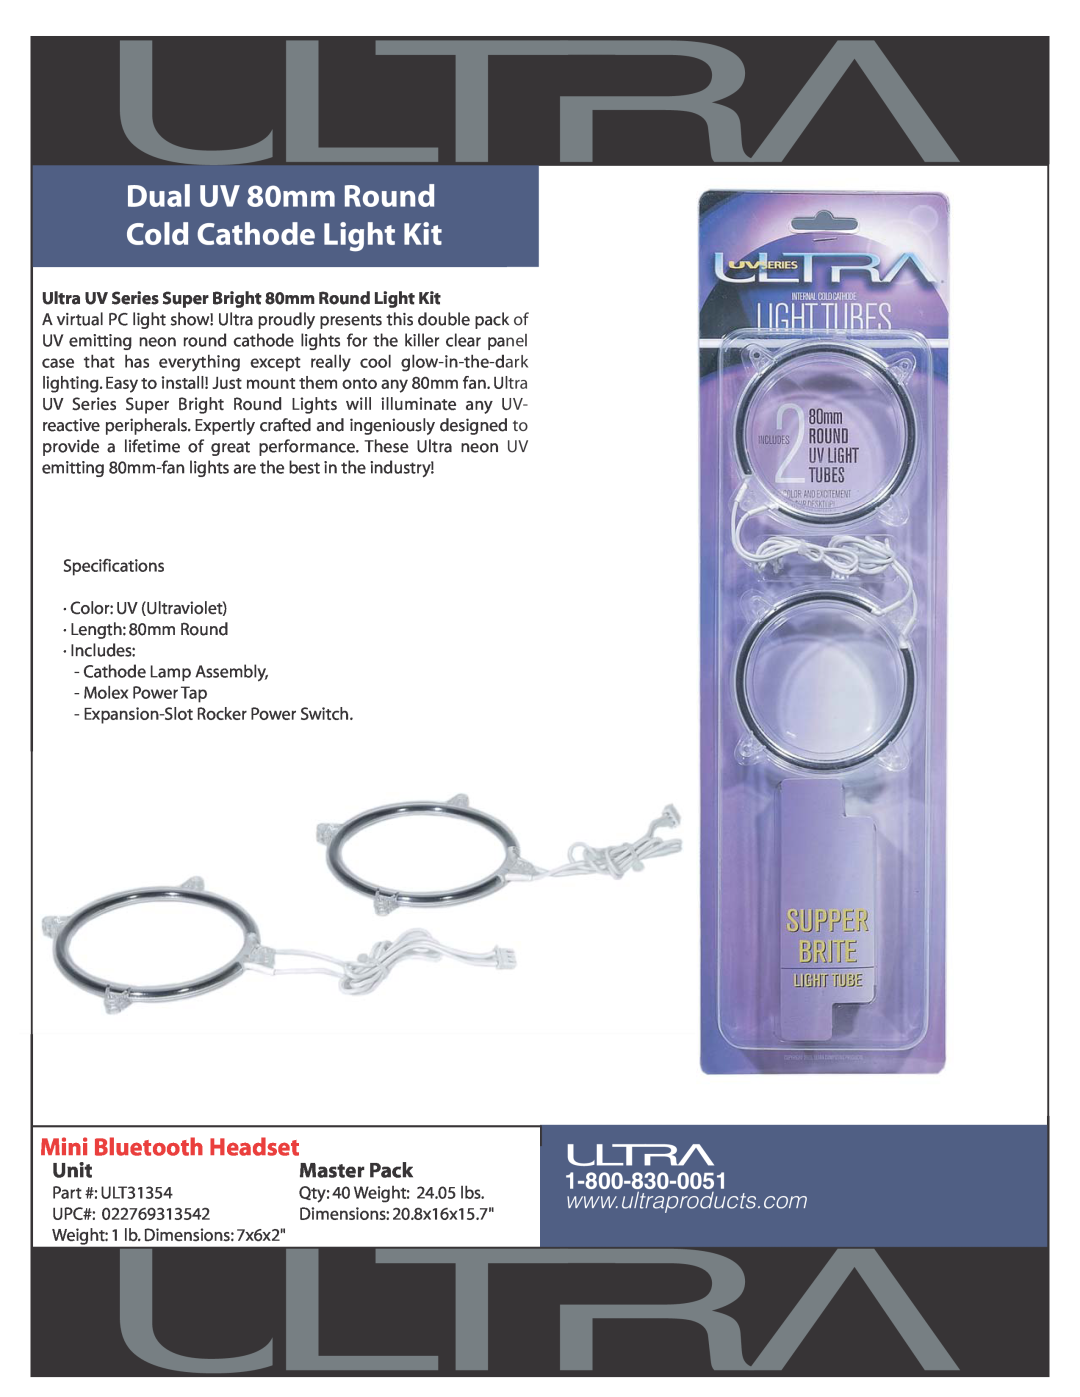 Ultra Products ULT31354 dimensions Dual UV 80mm Round Cold Cathode Light Kit, Mini Bluetooth Headset, Unit, Master Pack 